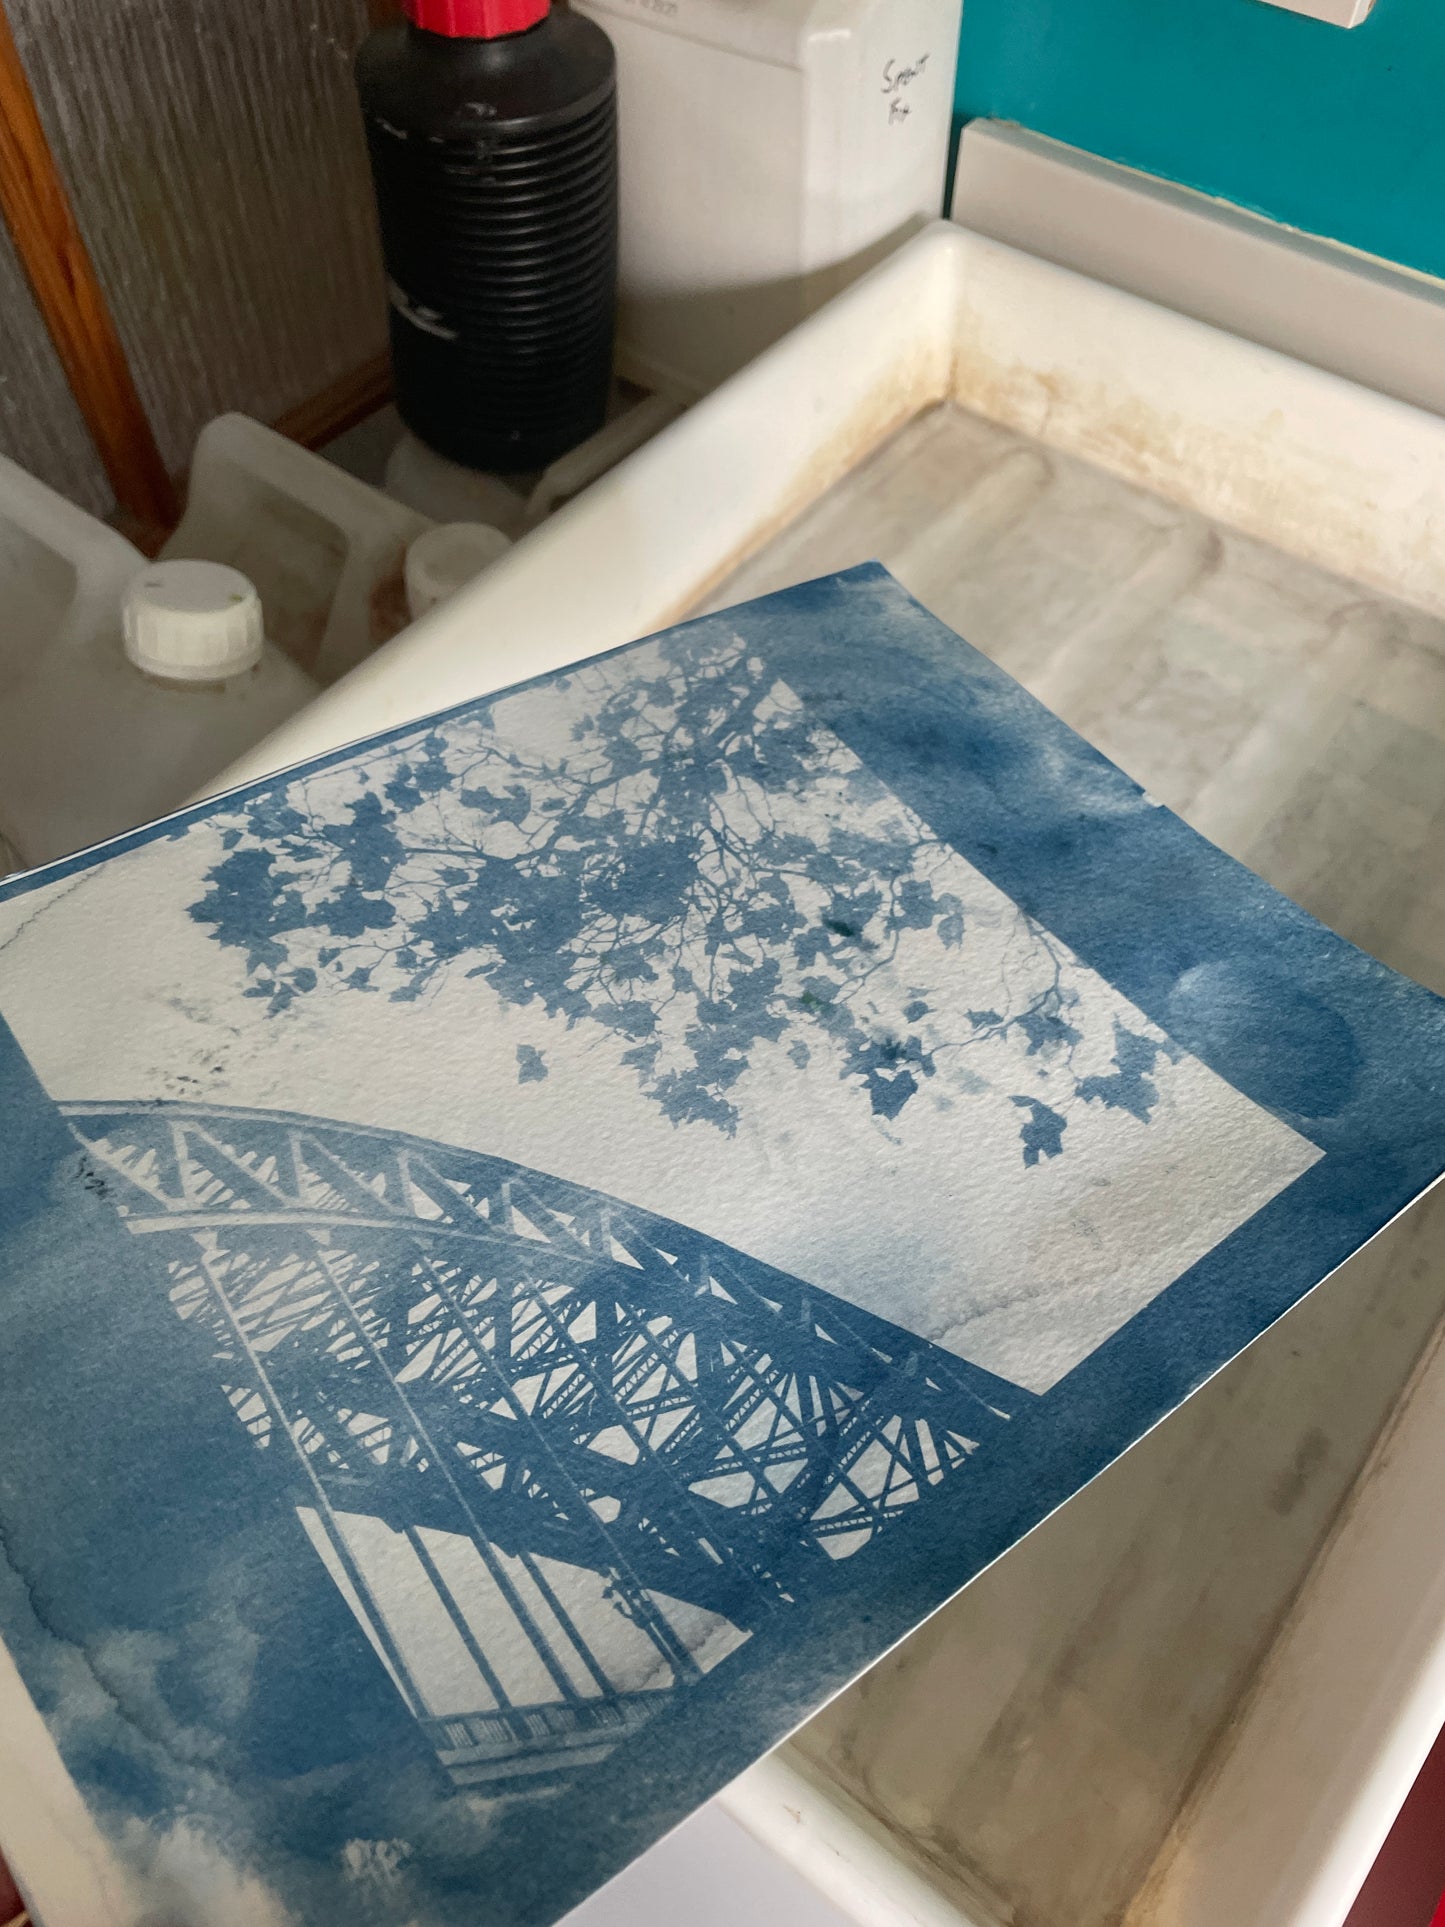 Introduction to Cyanotypes